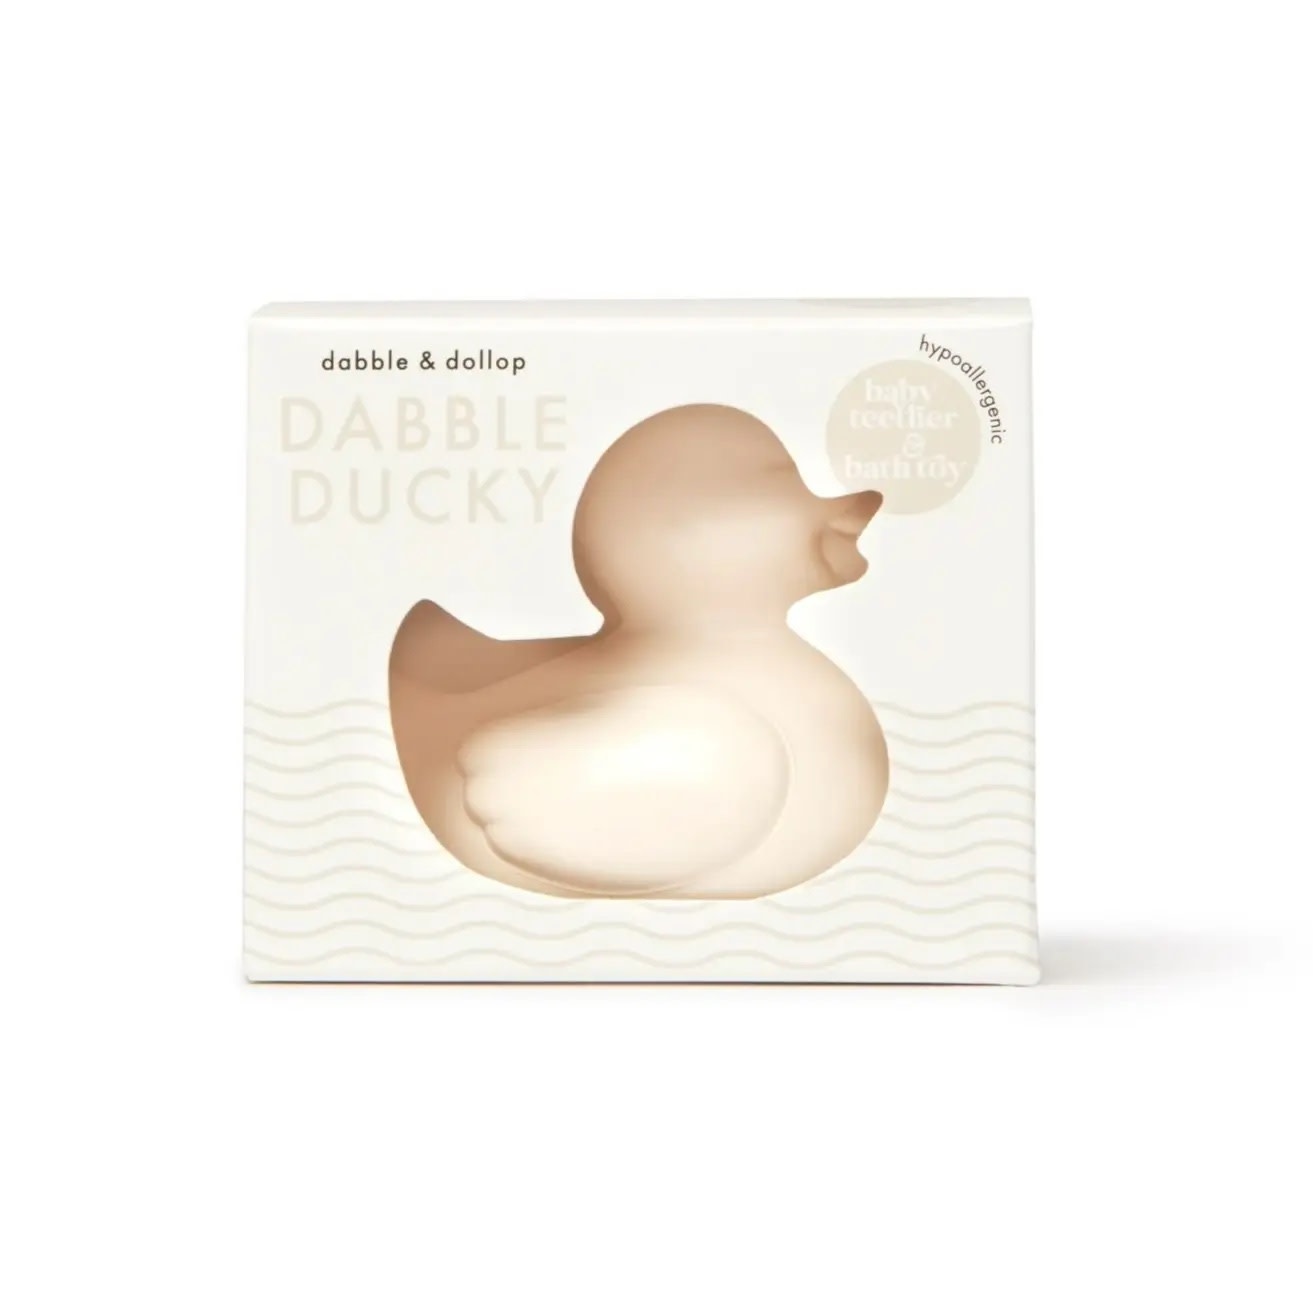 Dabble & Dollop - DD Dabble & Dollop - Dabble Ducky Bath Toy and Teether